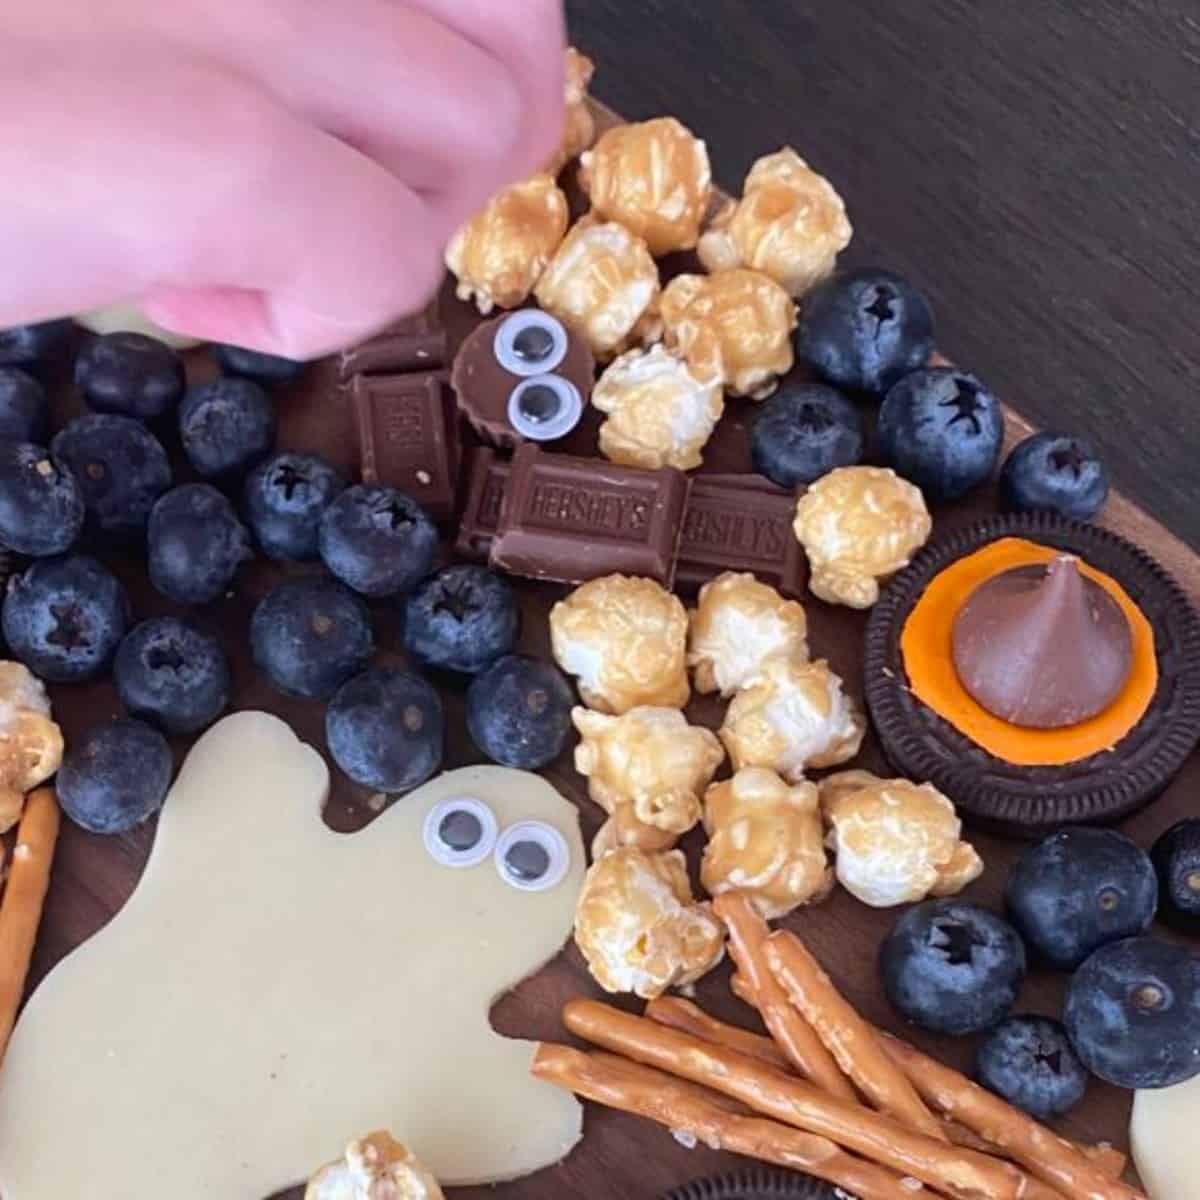 A Halloween dessert board with witches hat cookies with Oreos, cut out cheese ghosts and chocolate bats. The board also has caramel popcorn, blueberries and pretzels.